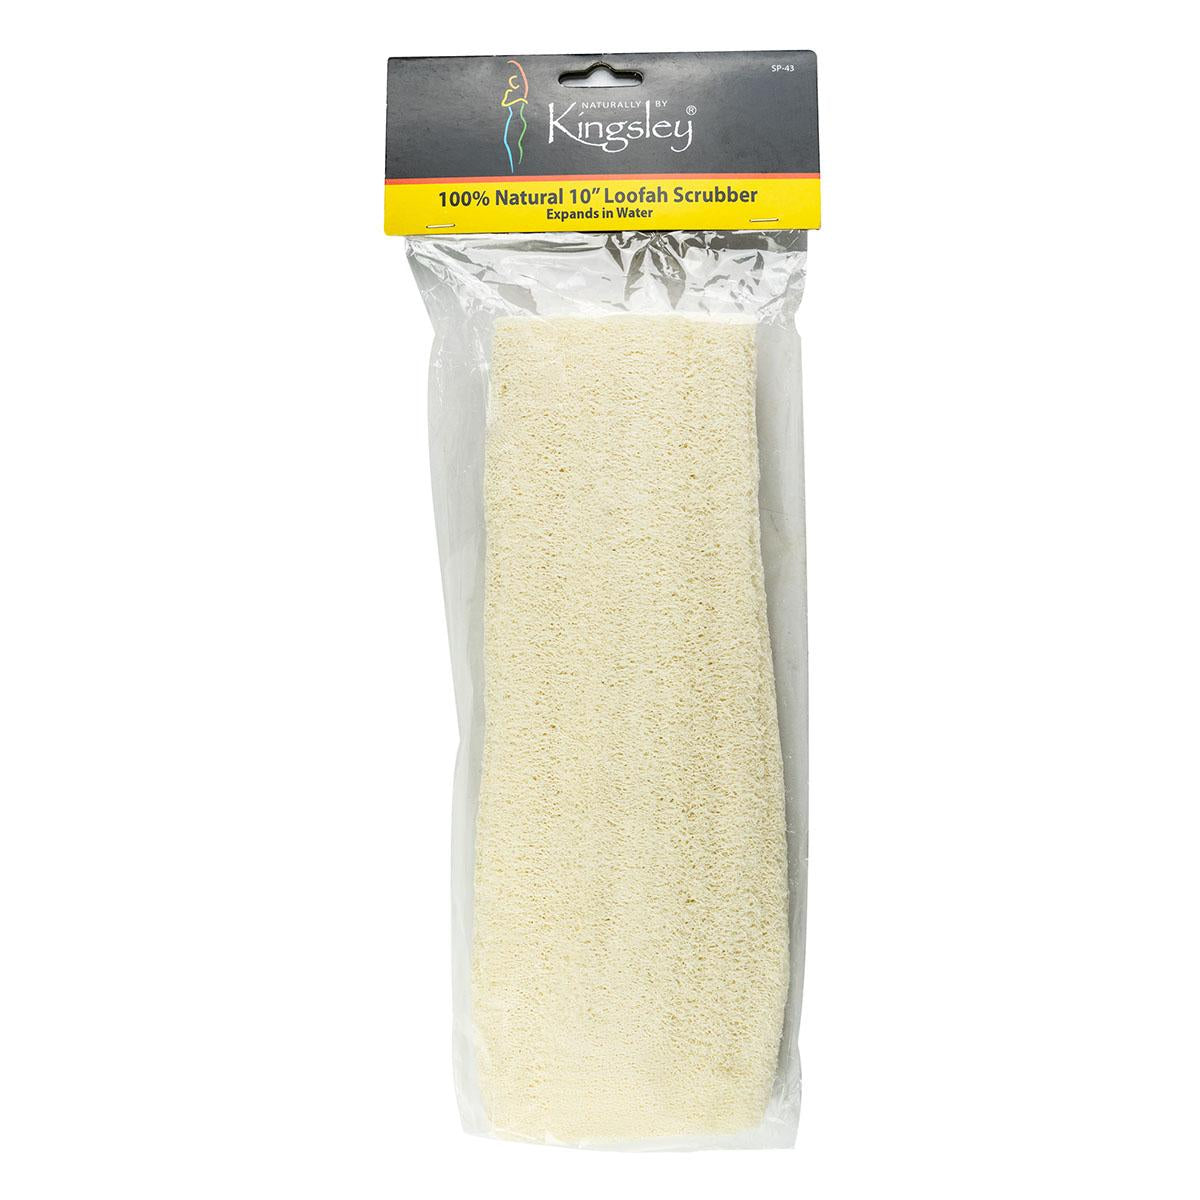 Primary image of Kingsley Kingsley Natural 10? Loofah Scrubber 10 inches Loofah